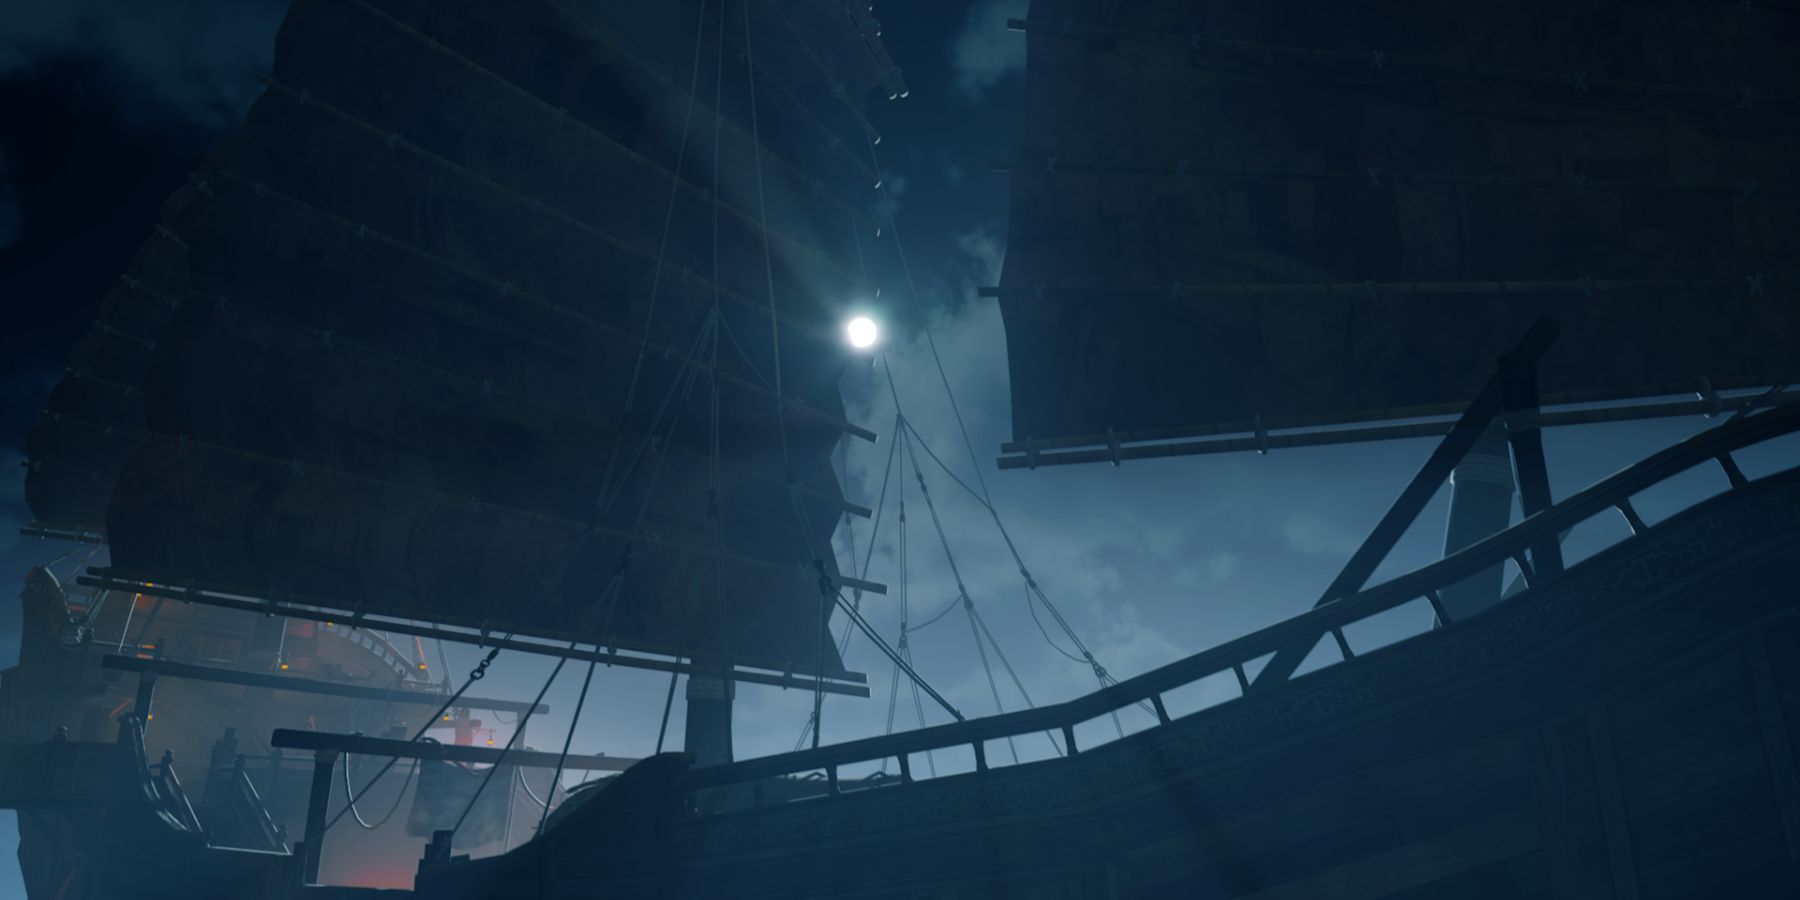 The Pirate Queen ship in moonlight